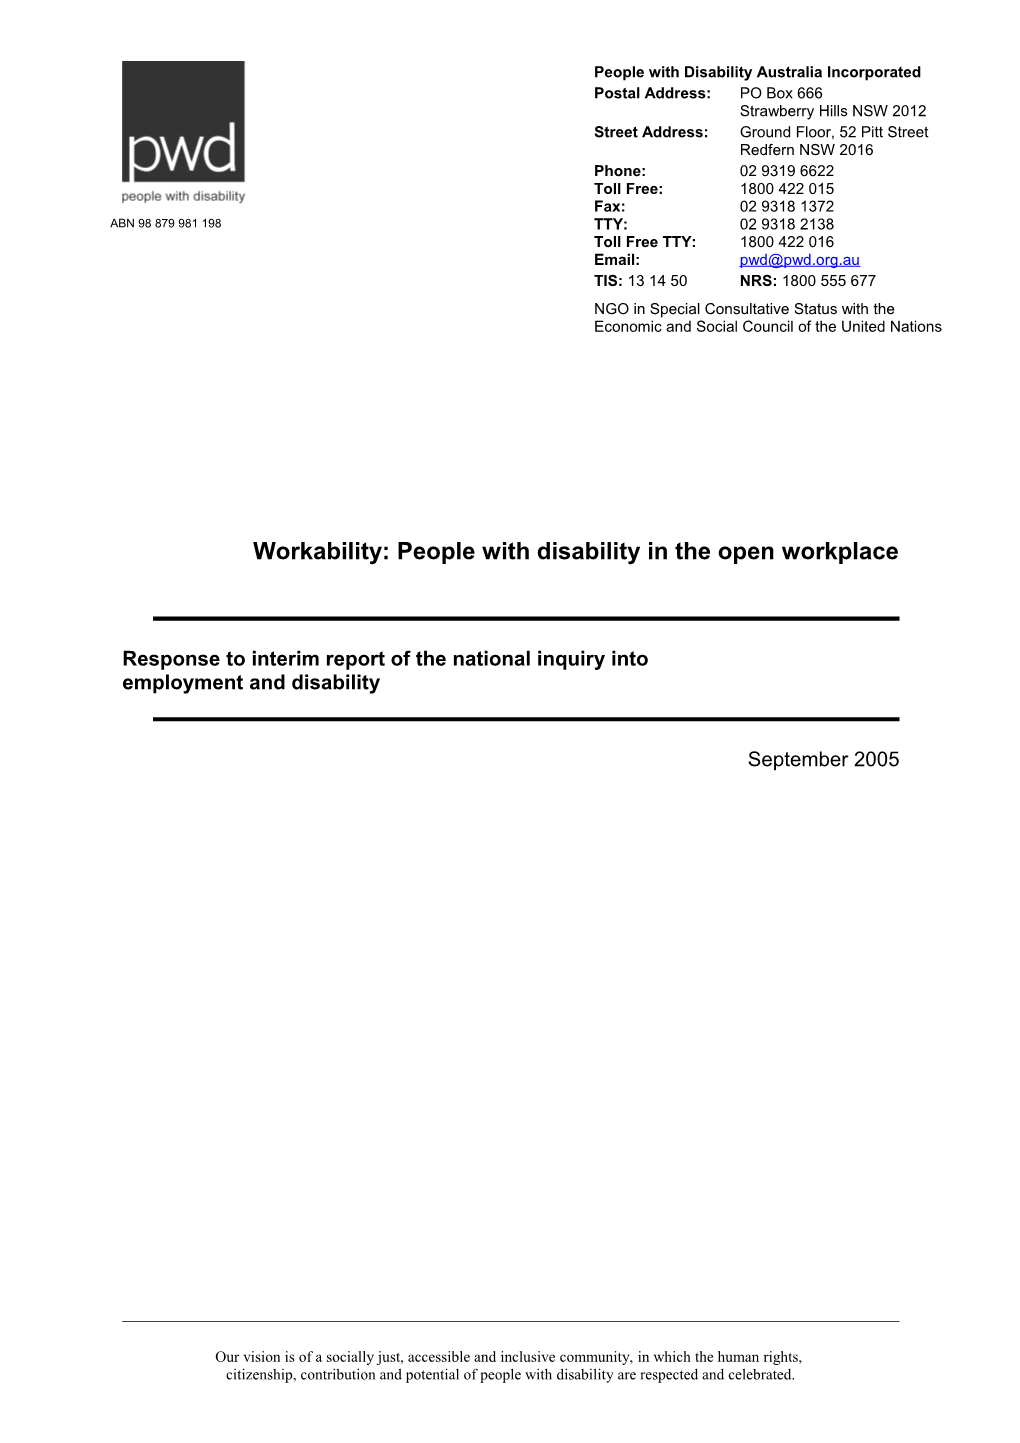 Workability: People with Disability in the Open Workplace